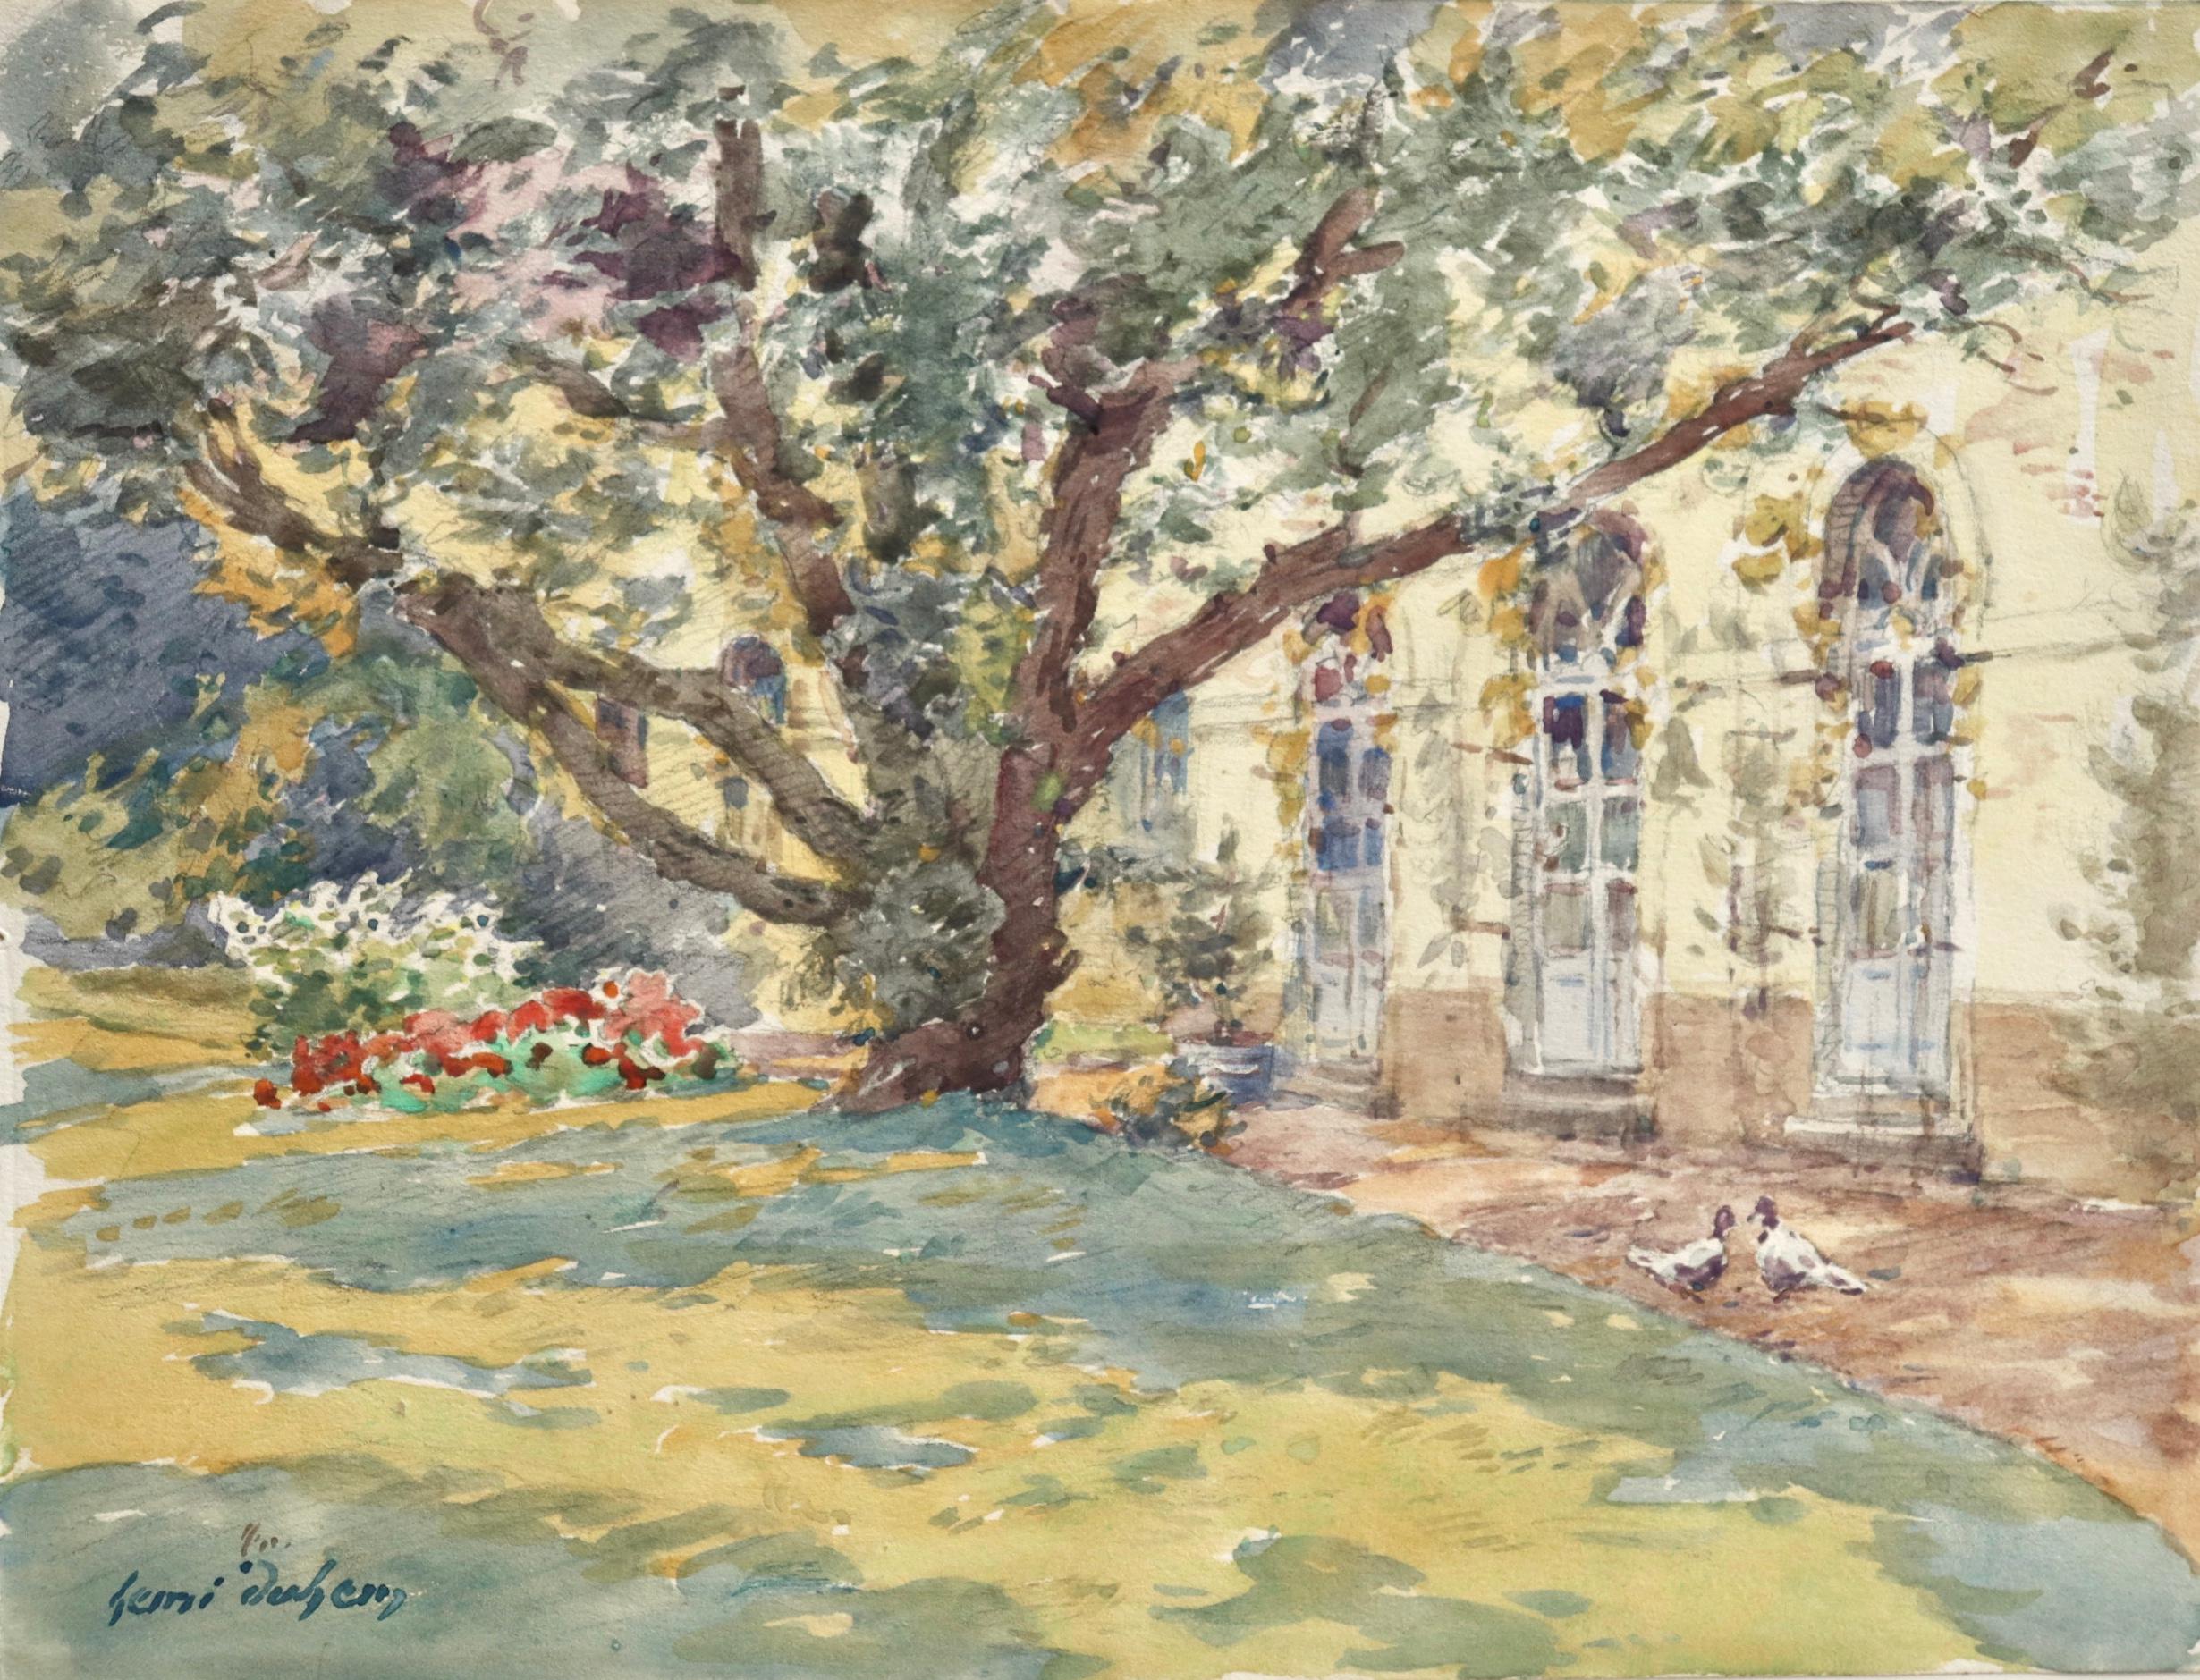 A lovely watercolour on paper circa 1920 by Henri Duhem depicting two birds in the shadow of a tree on a sunny day in the artist's garden. Signed lower left. This piece is not currently framed but a suitable frame can be sourced if